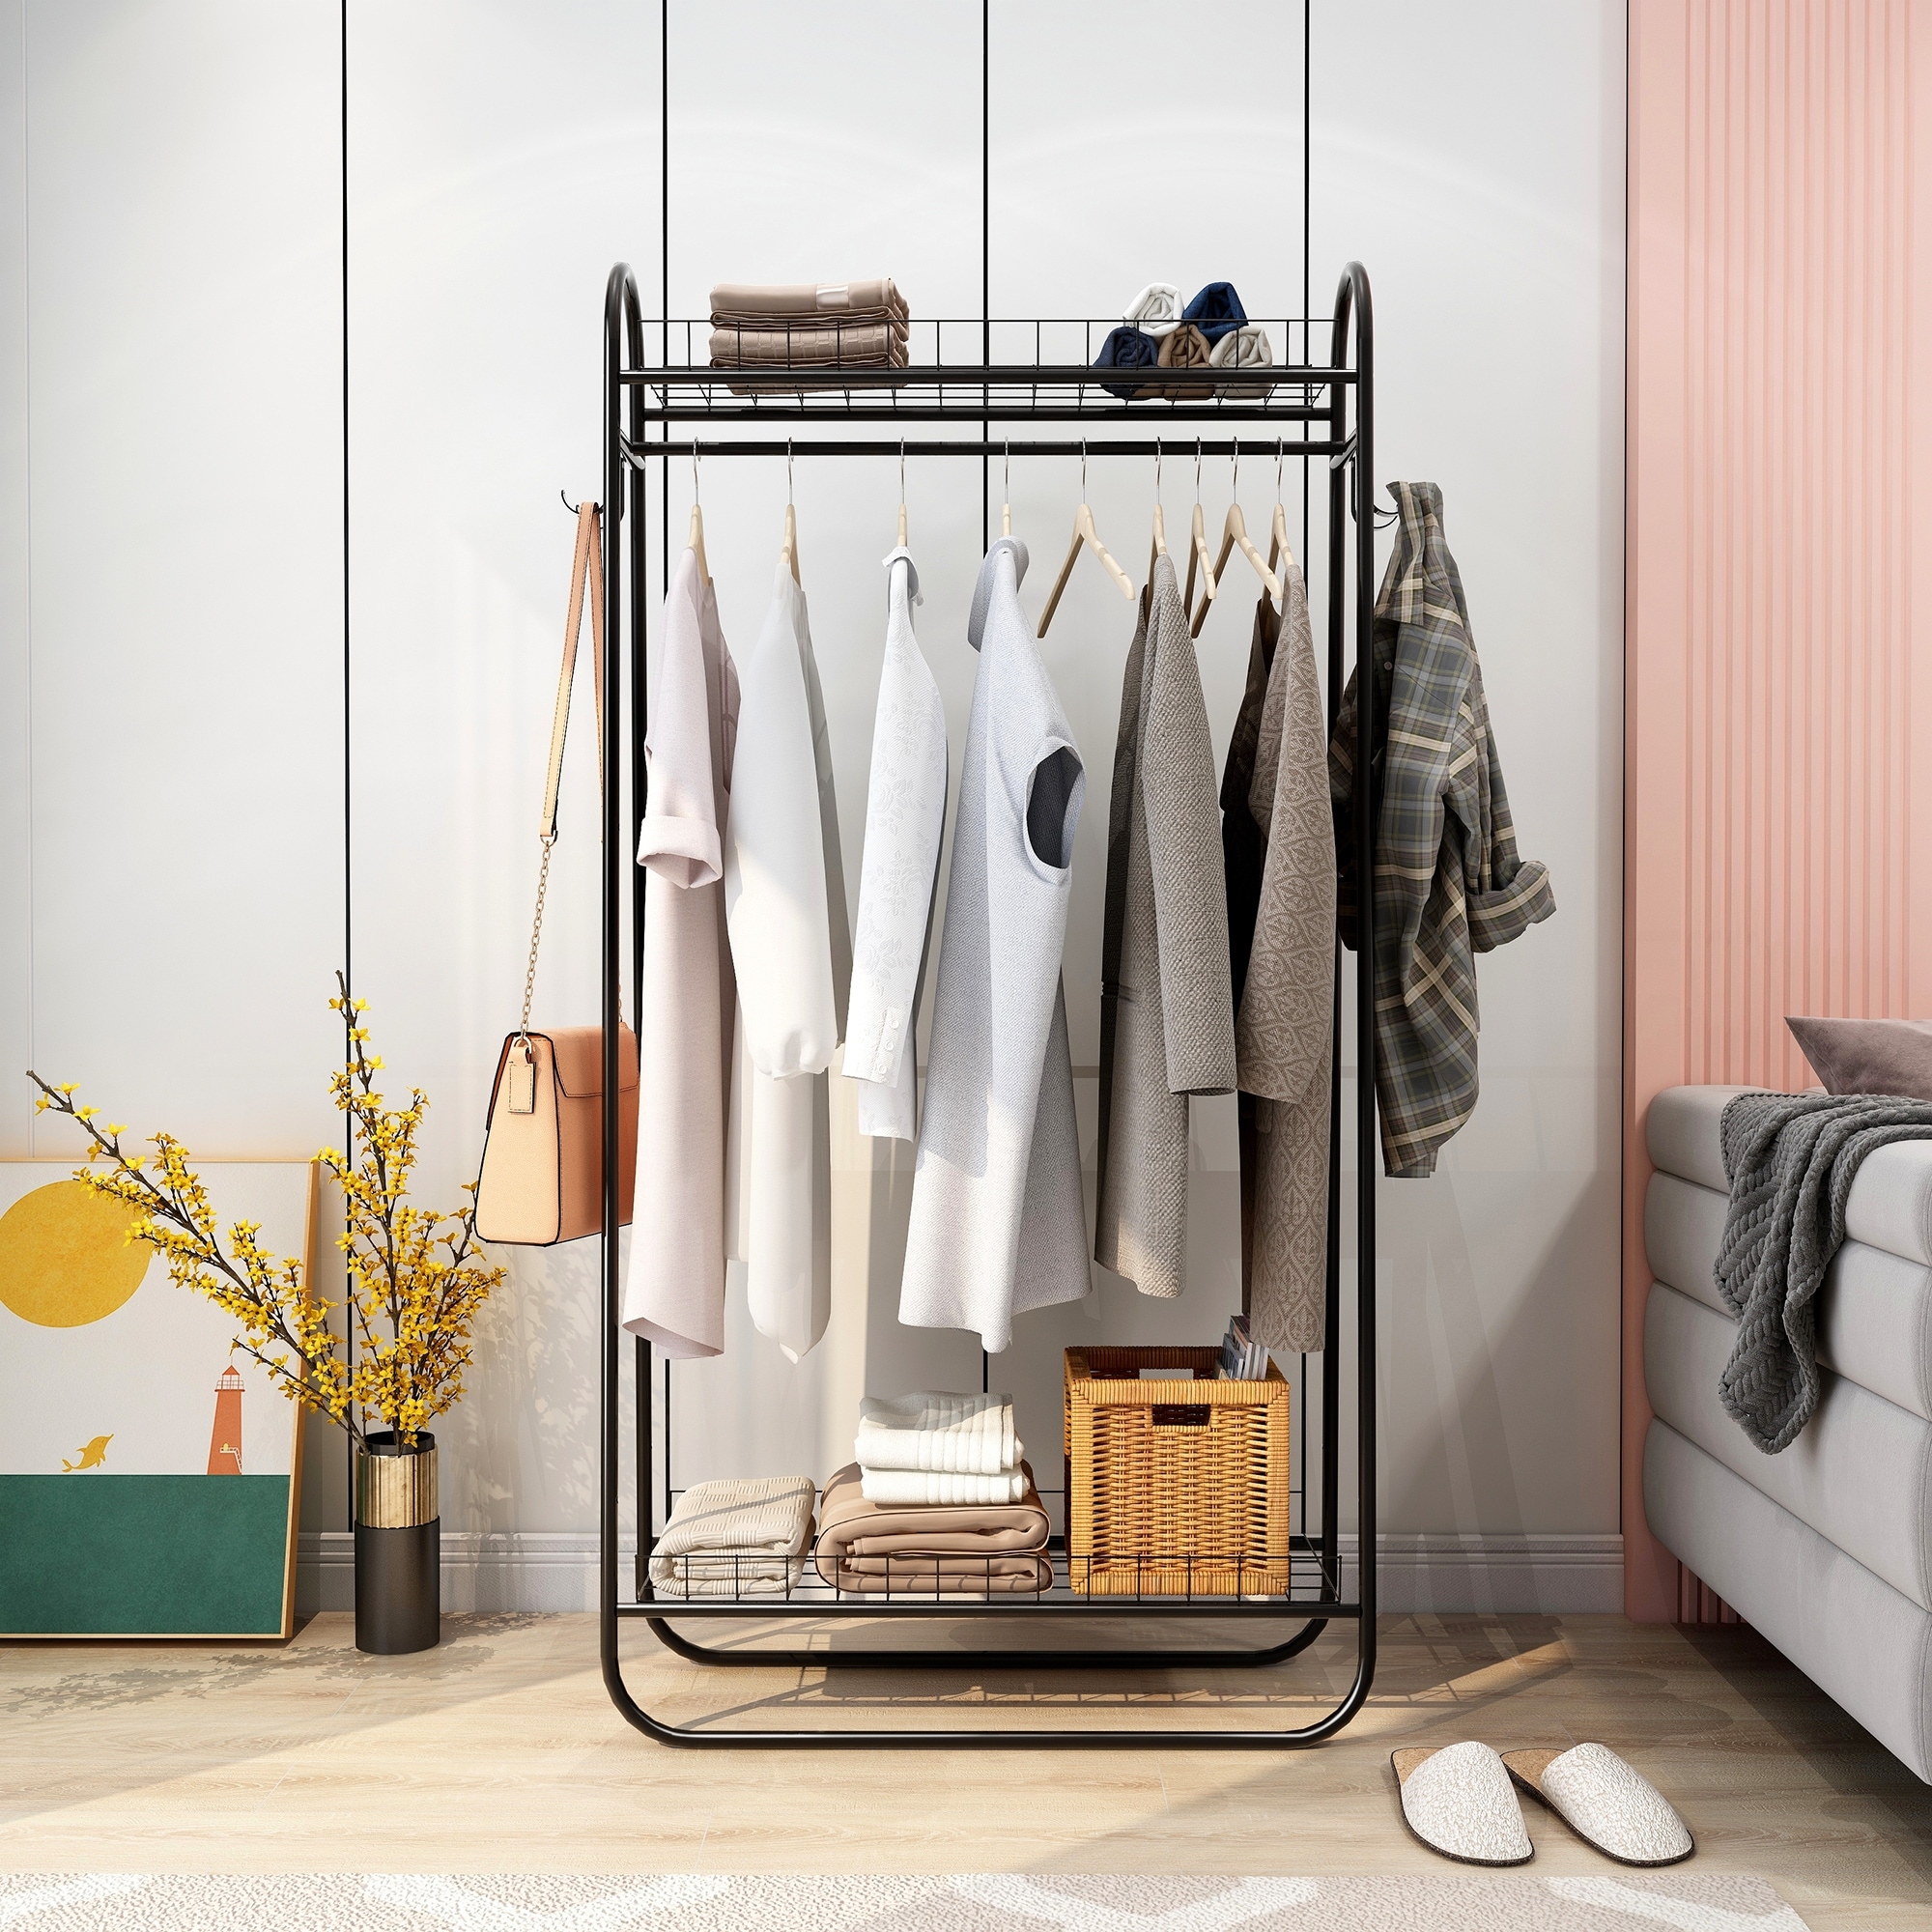 https://ak1.ostkcdn.com/images/products/is/images/direct/2038798e5a7e5da758e0a6513a780040bc24e308/Freestanding-Hanger-Double-Rods-Bedroom-Clothing-Rack.jpg